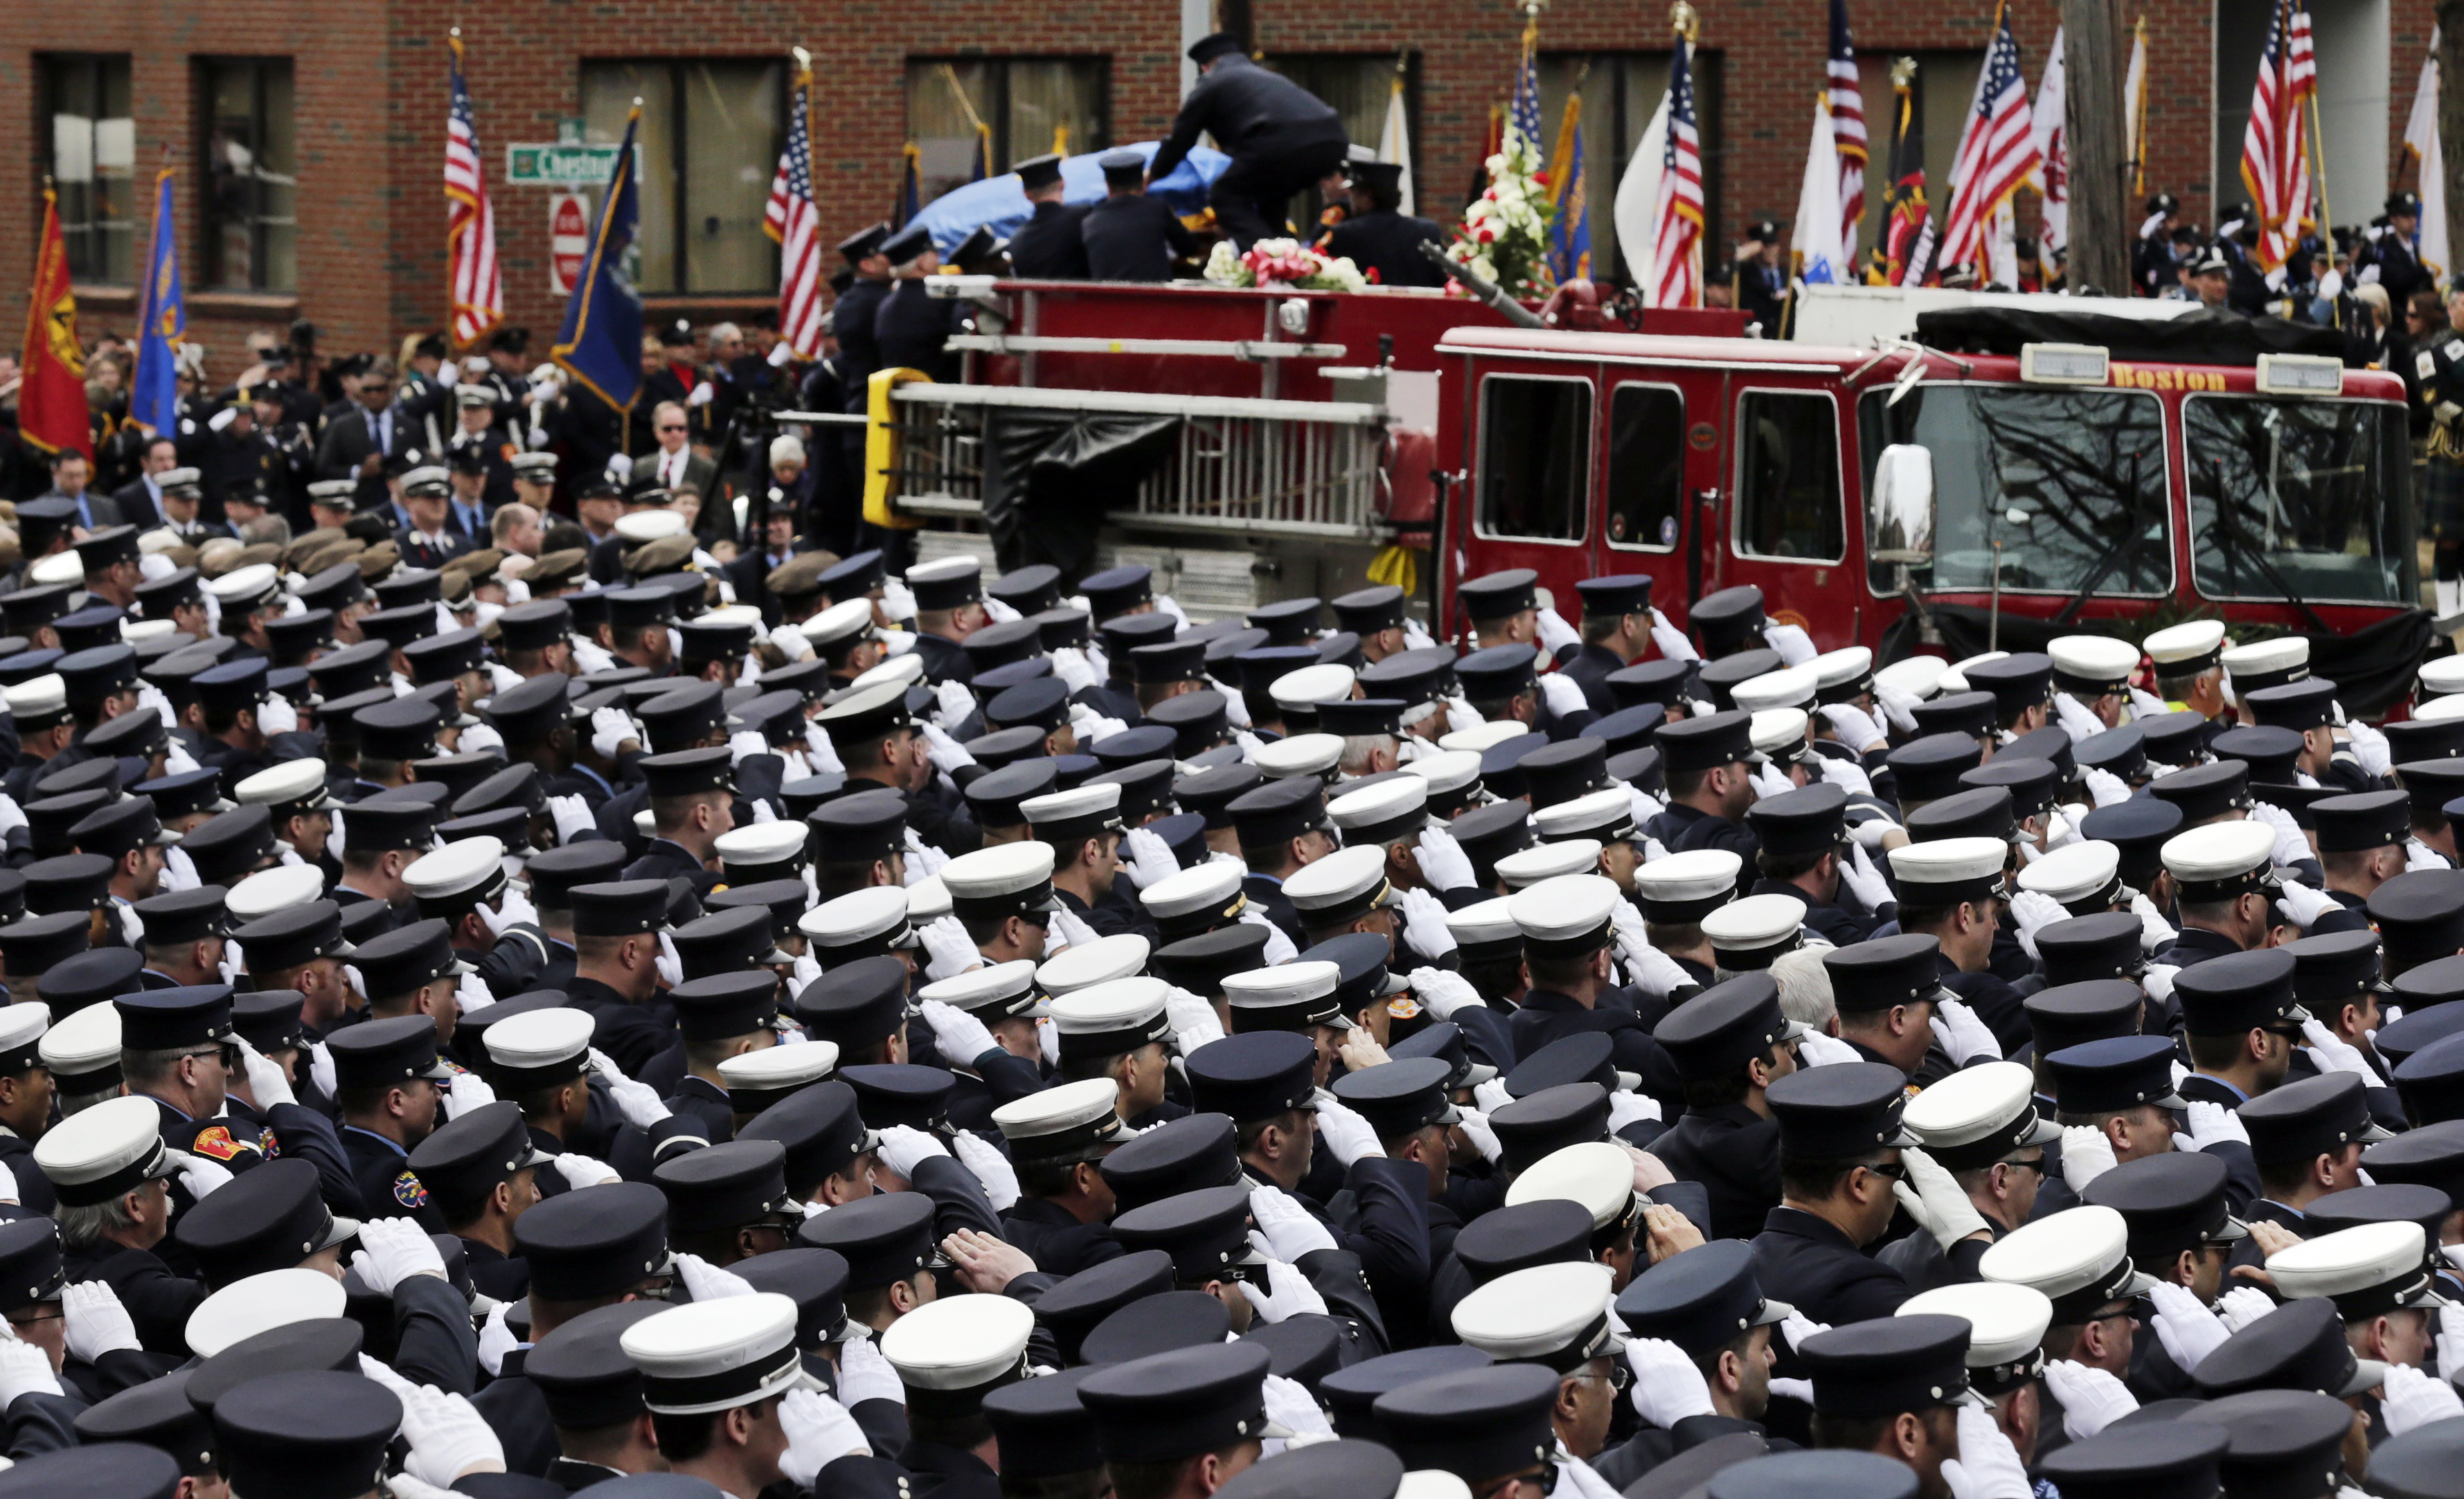 Firefighters salute as the casket of Boston fire Lt. Edward Walsh is lowered from Engine 33 as the funeral procession arrives outside St. Patrick's Church in Watertown, Mass., Wednesday, April 2, 2014. Walsh and his colleague Michael Kennedy died after being trapped while battling a nine-alarm apartment fire in Boston on March 26. (AP Photo/Charles Krupa)